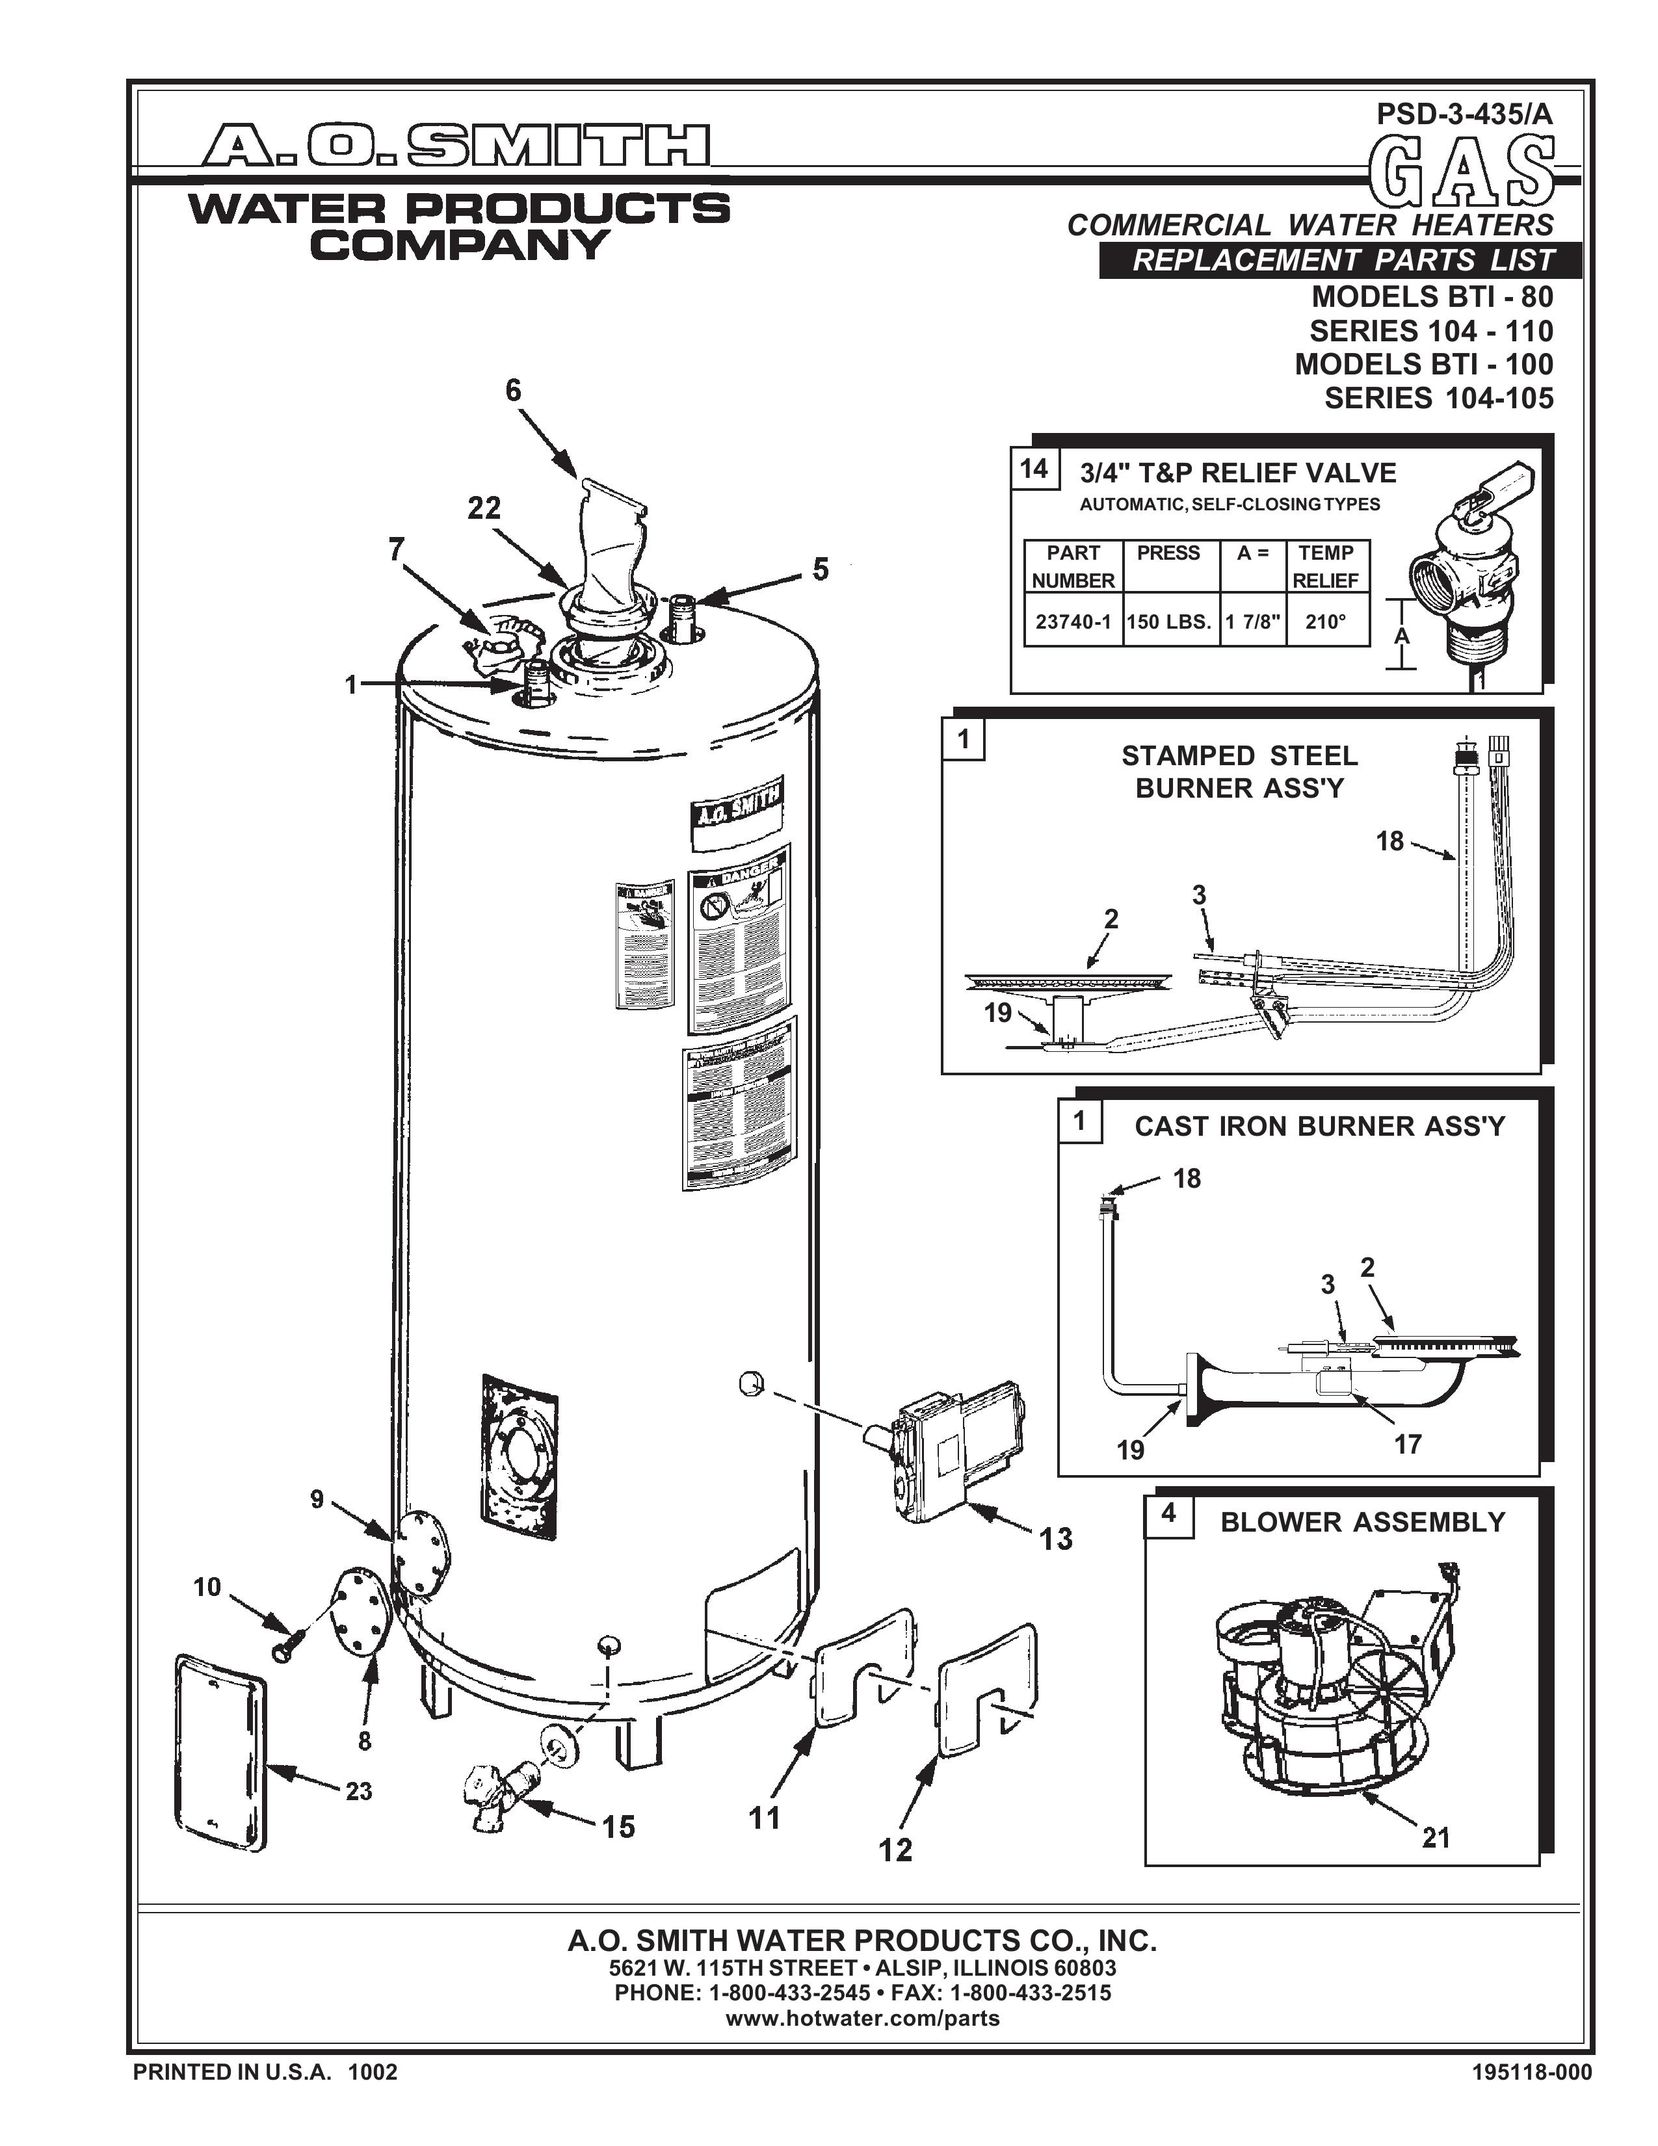 A.O. Smith 104 - 110 Water Heater User Manual